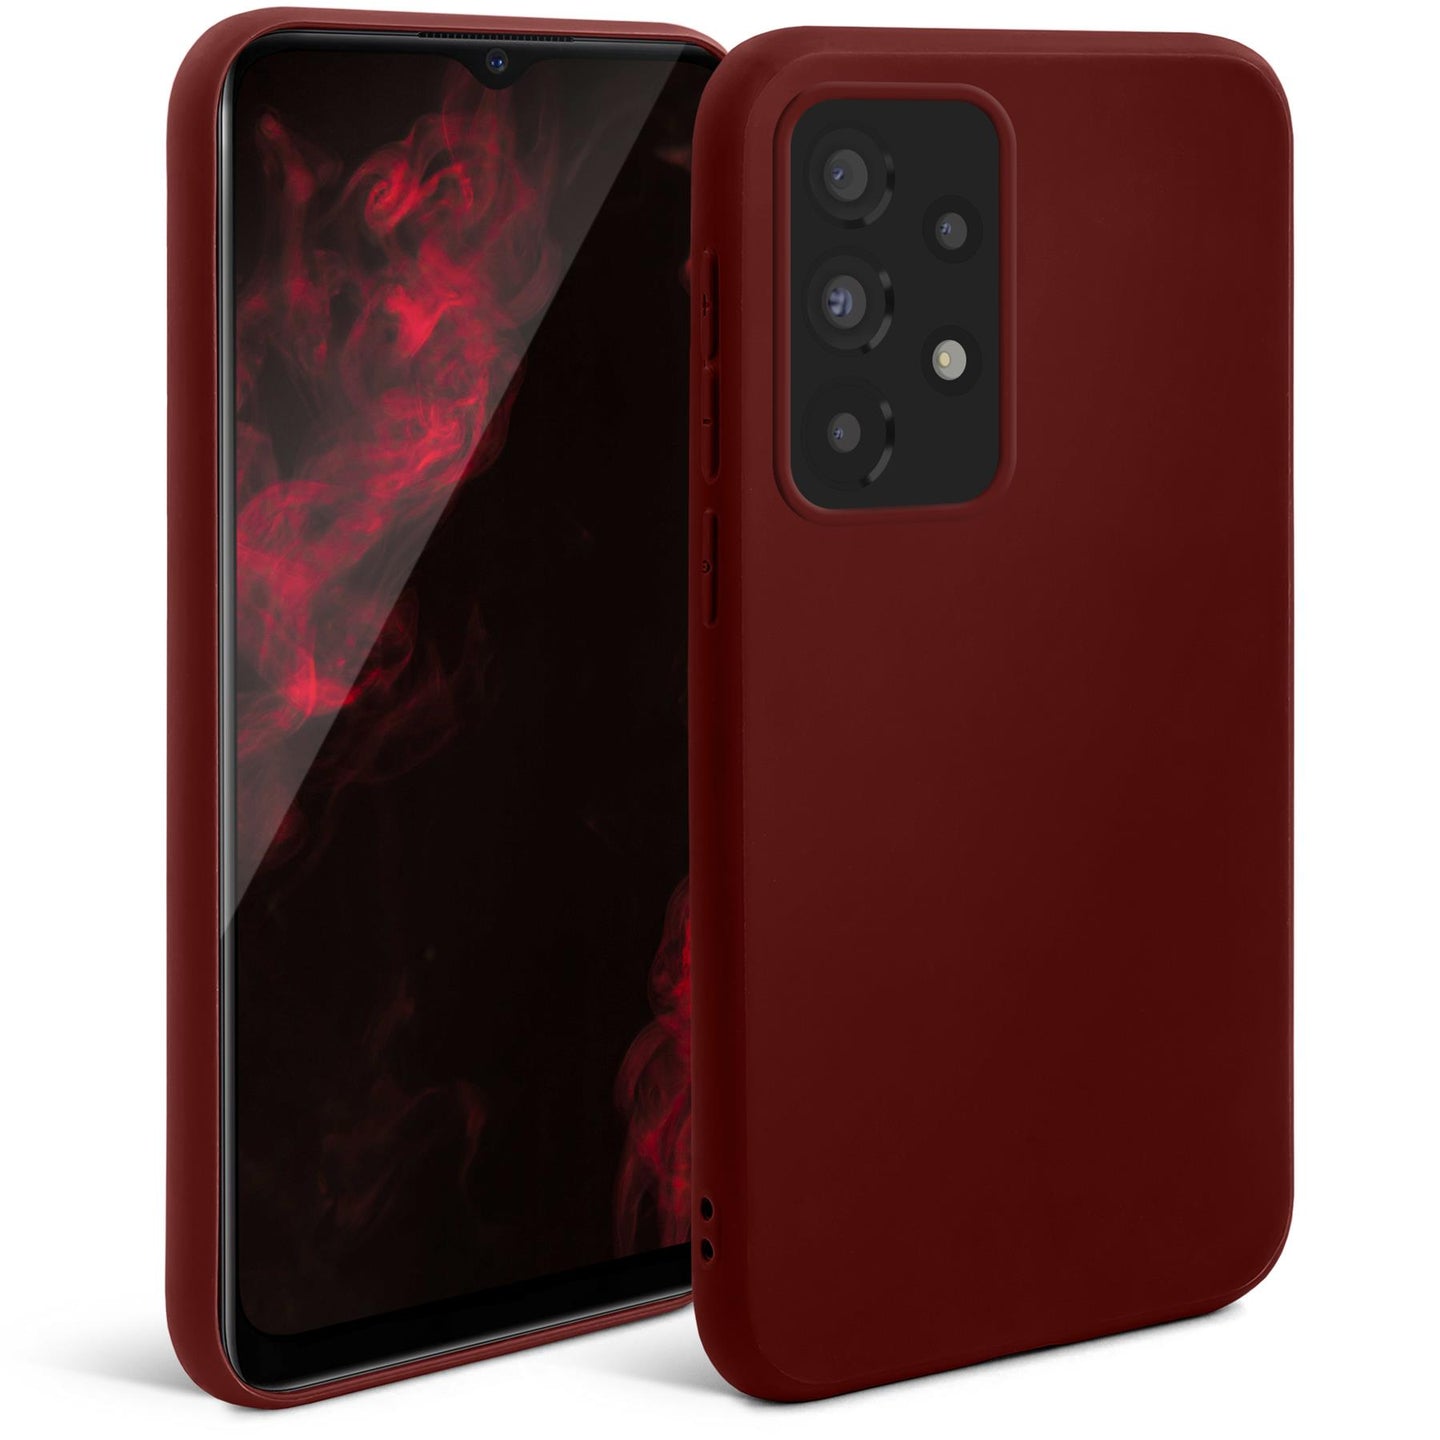 Moozy Minimalist Series Silicone Case for Samsung A13 4G, Wine Red - Matte Finish Lightweight Mobile Phone Case Slim Soft Protective TPU Cover with Matte Surface